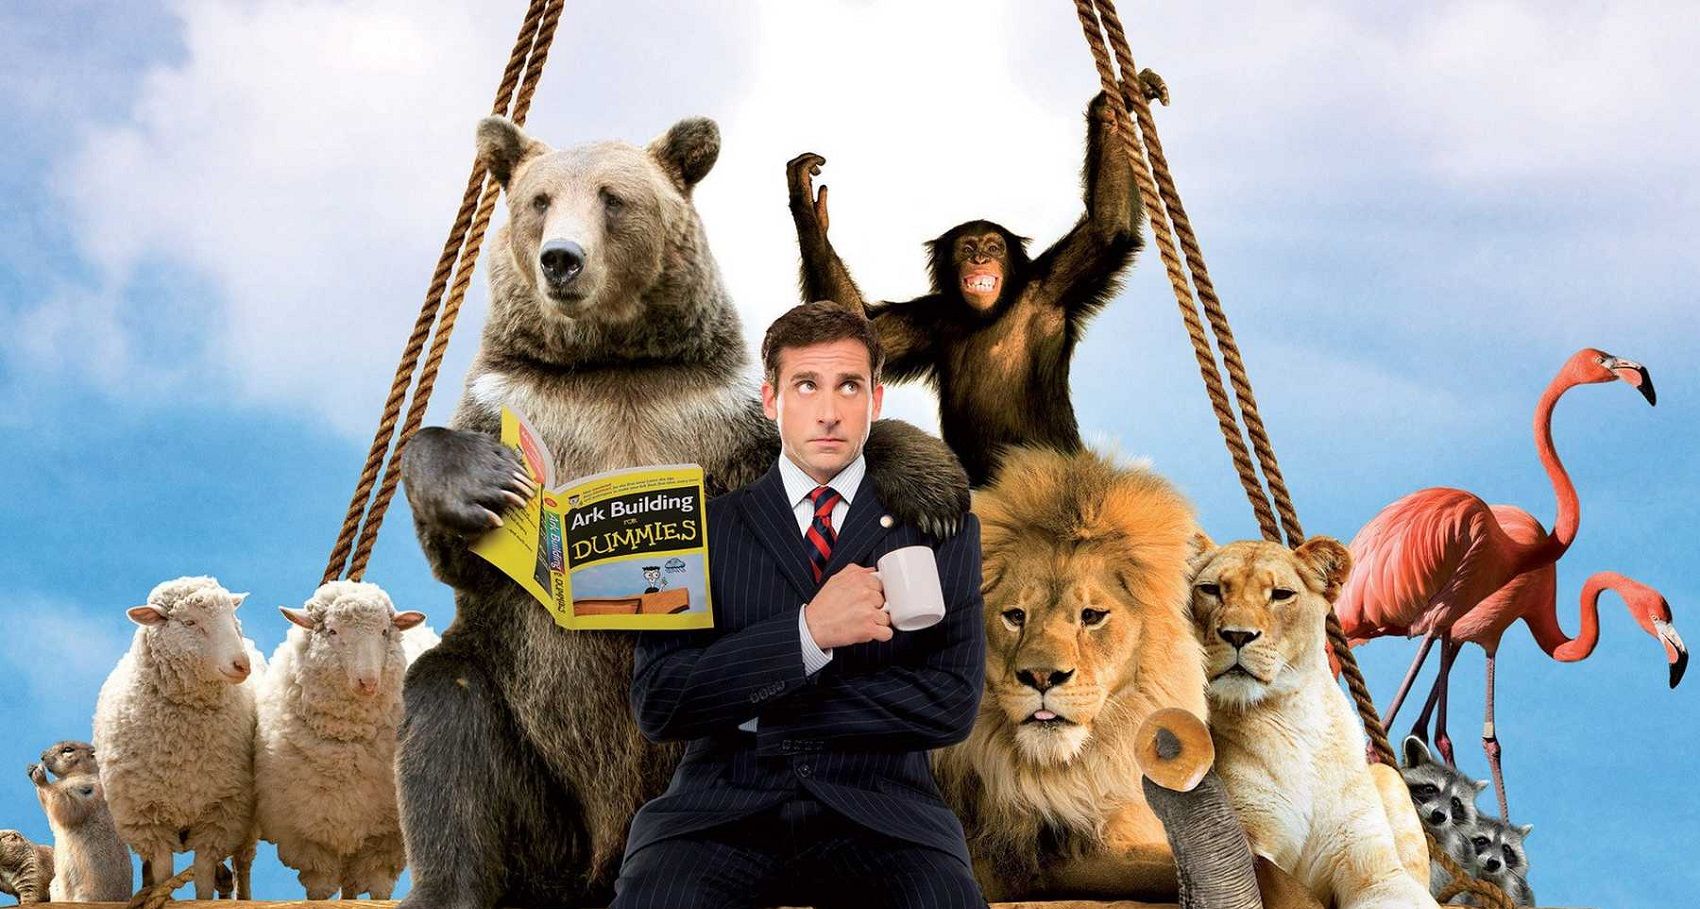 A crop of the poster for Evan Almighty